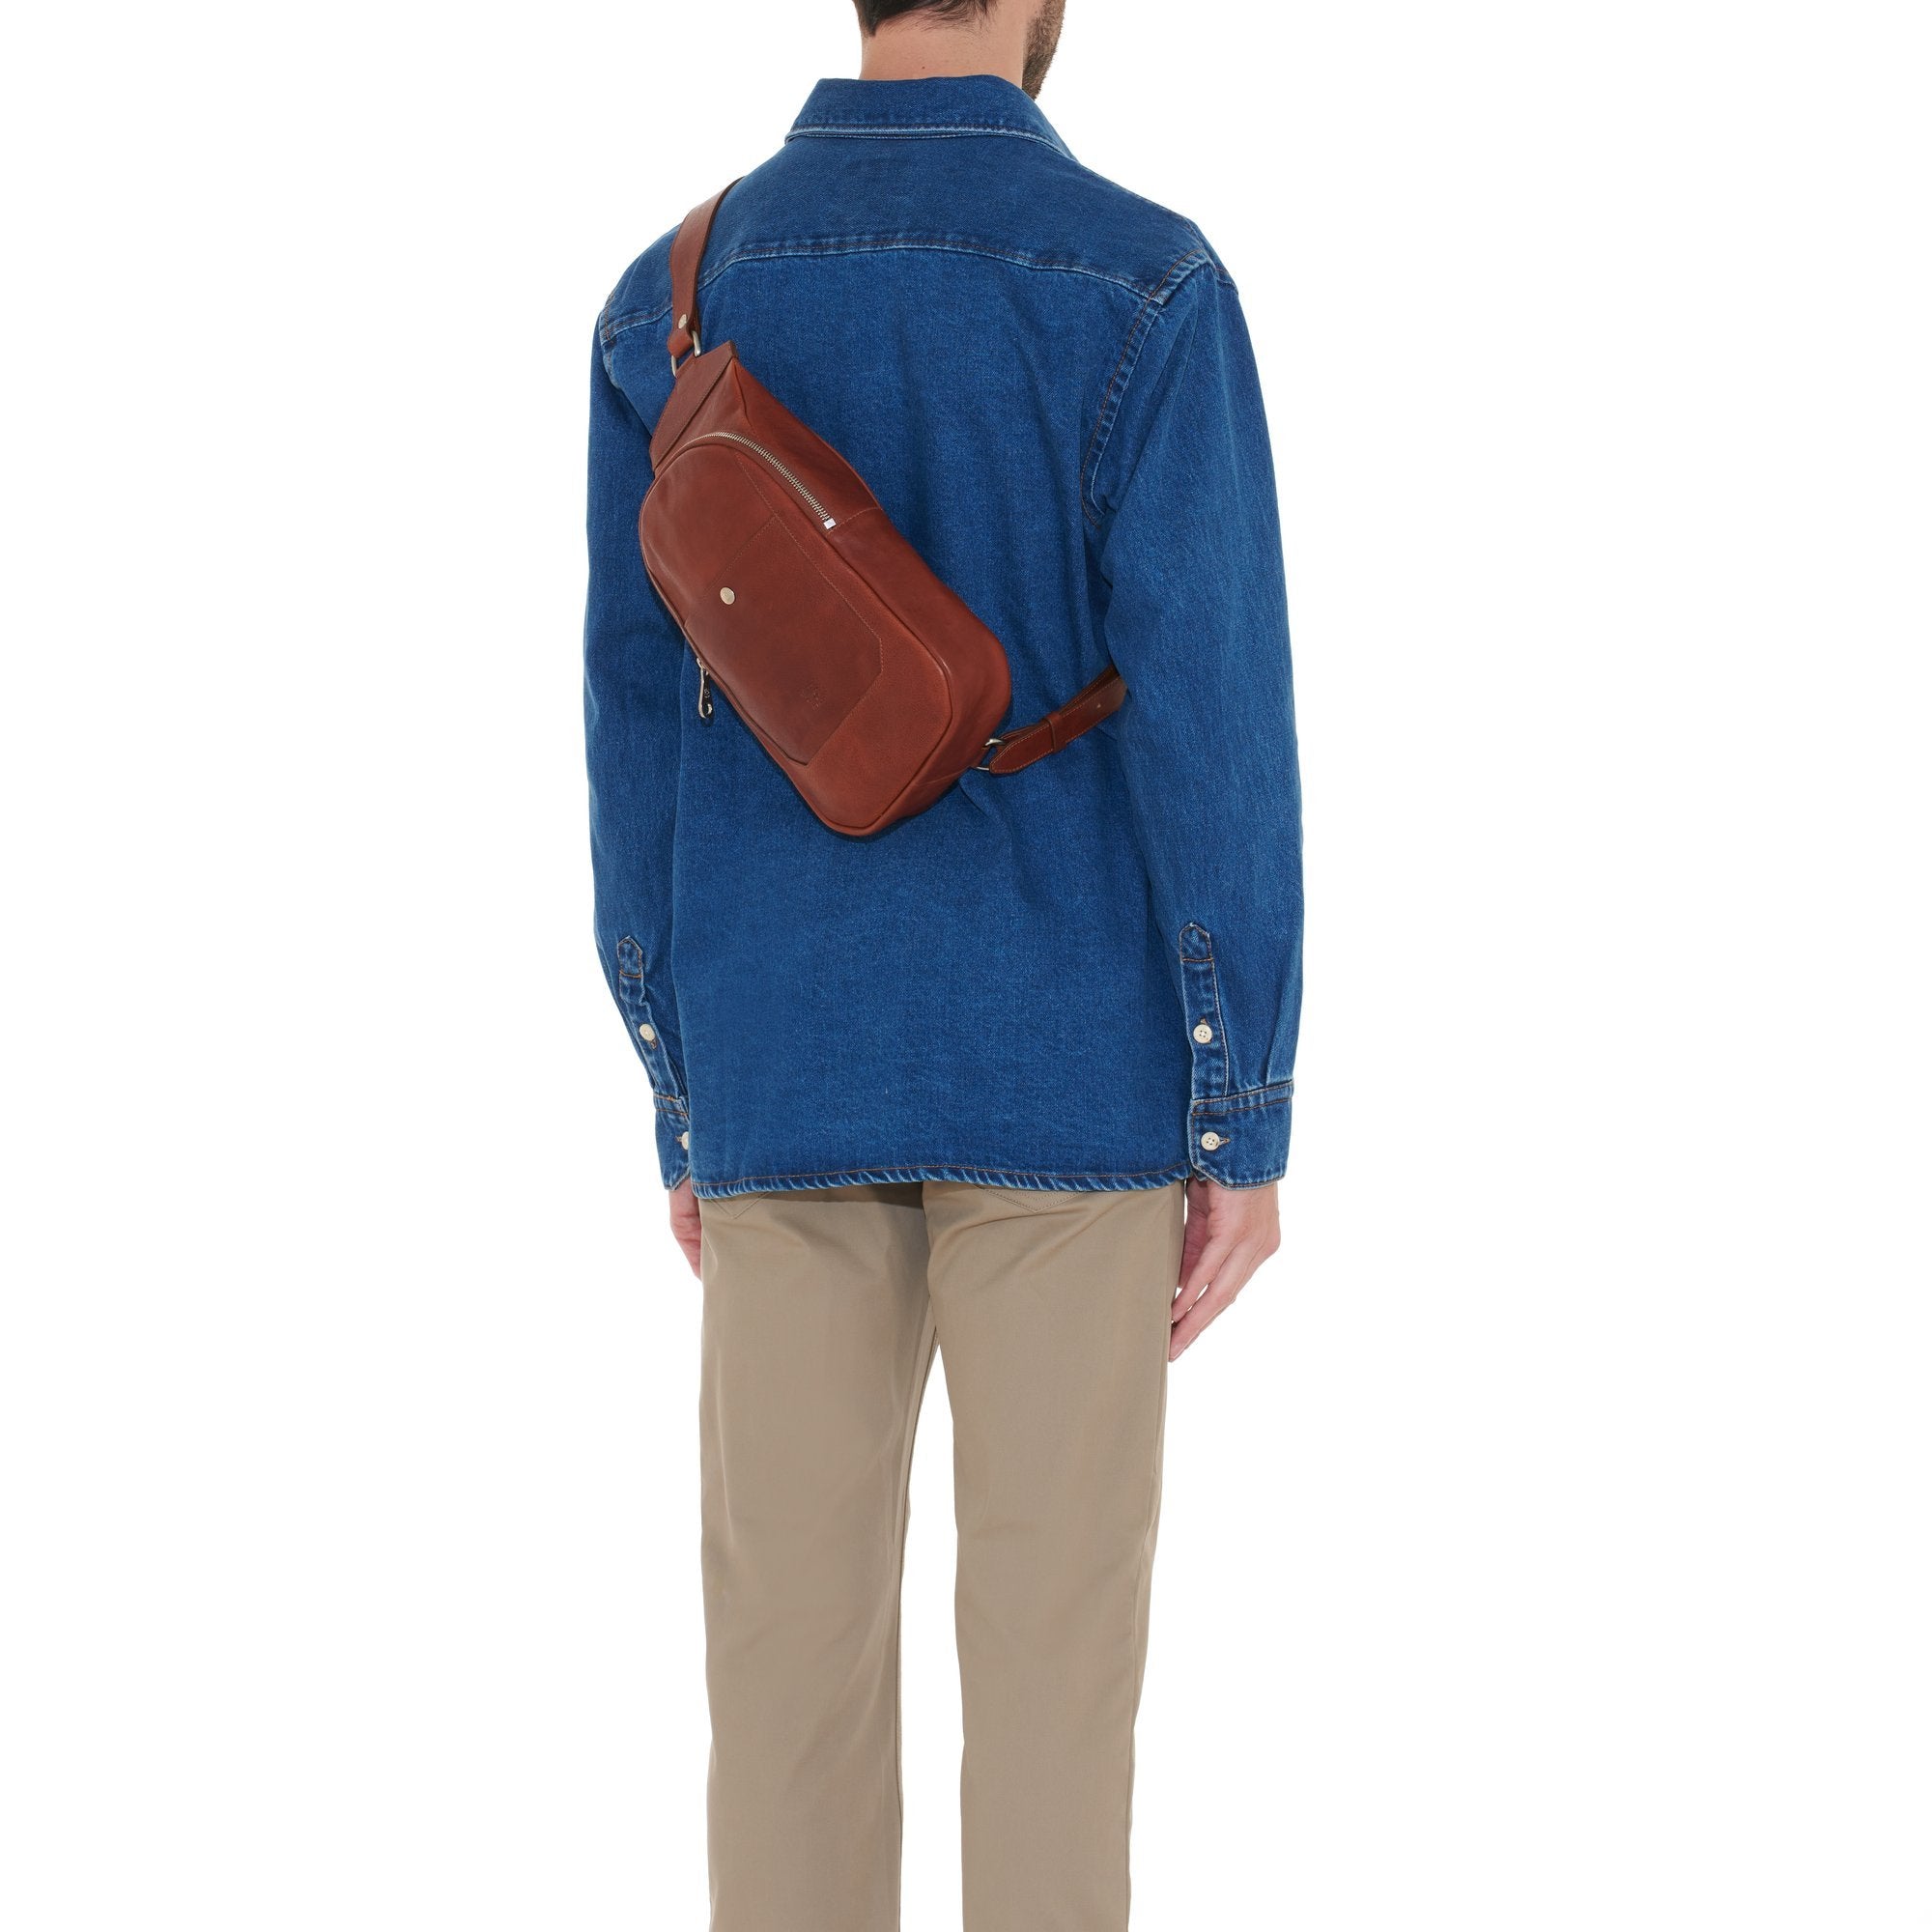 Cosimo | Men's one strap backpack in vintage leather color sepia